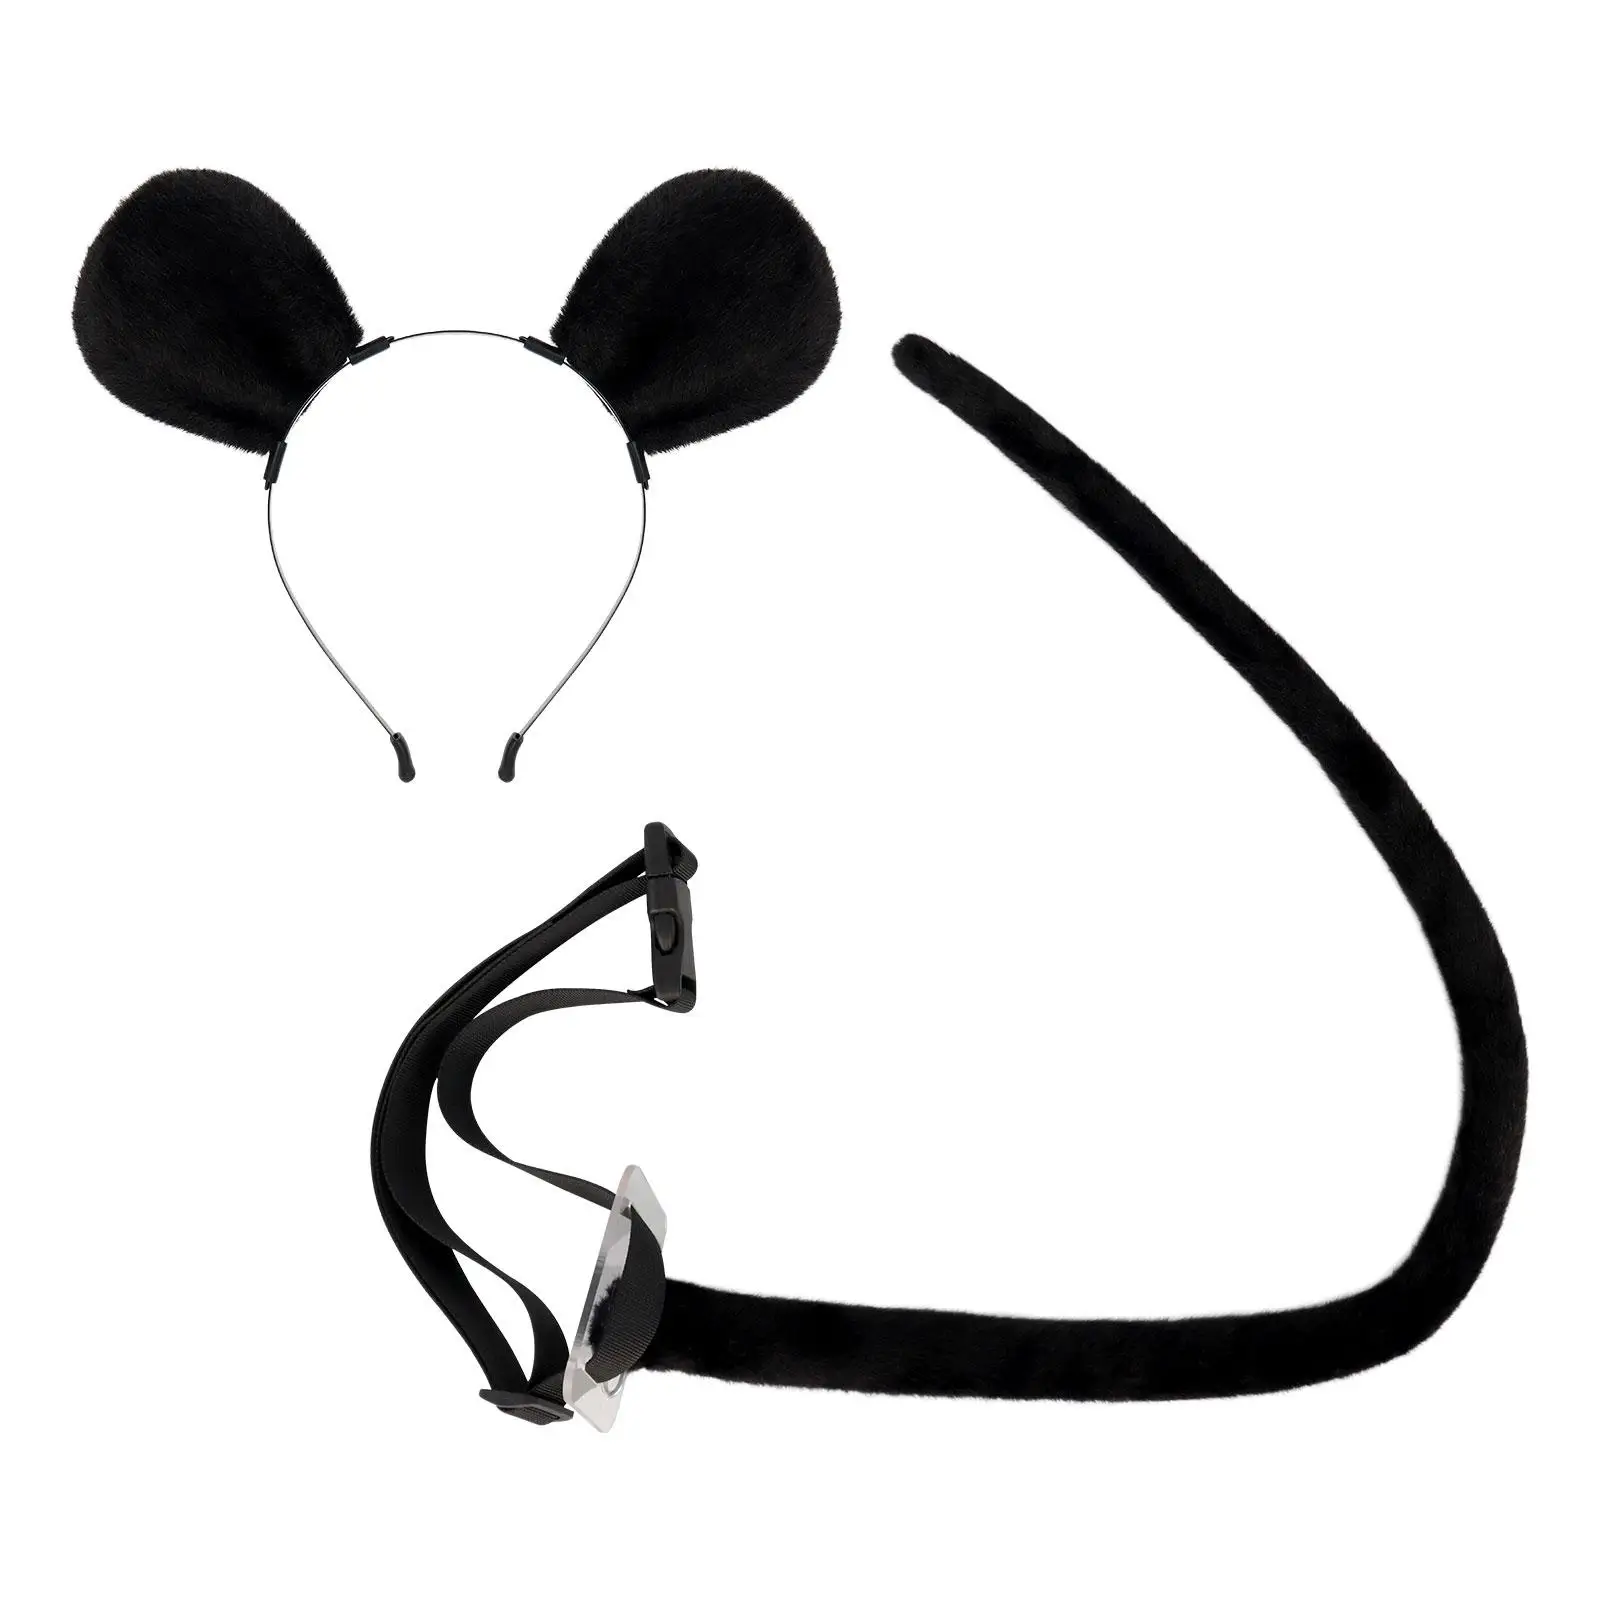 Mouse Costume Mice Ears and Tail, Black 2Pcs Mouse Ears Headband and Tail for Animal Themed Parties, Performance, Halloween